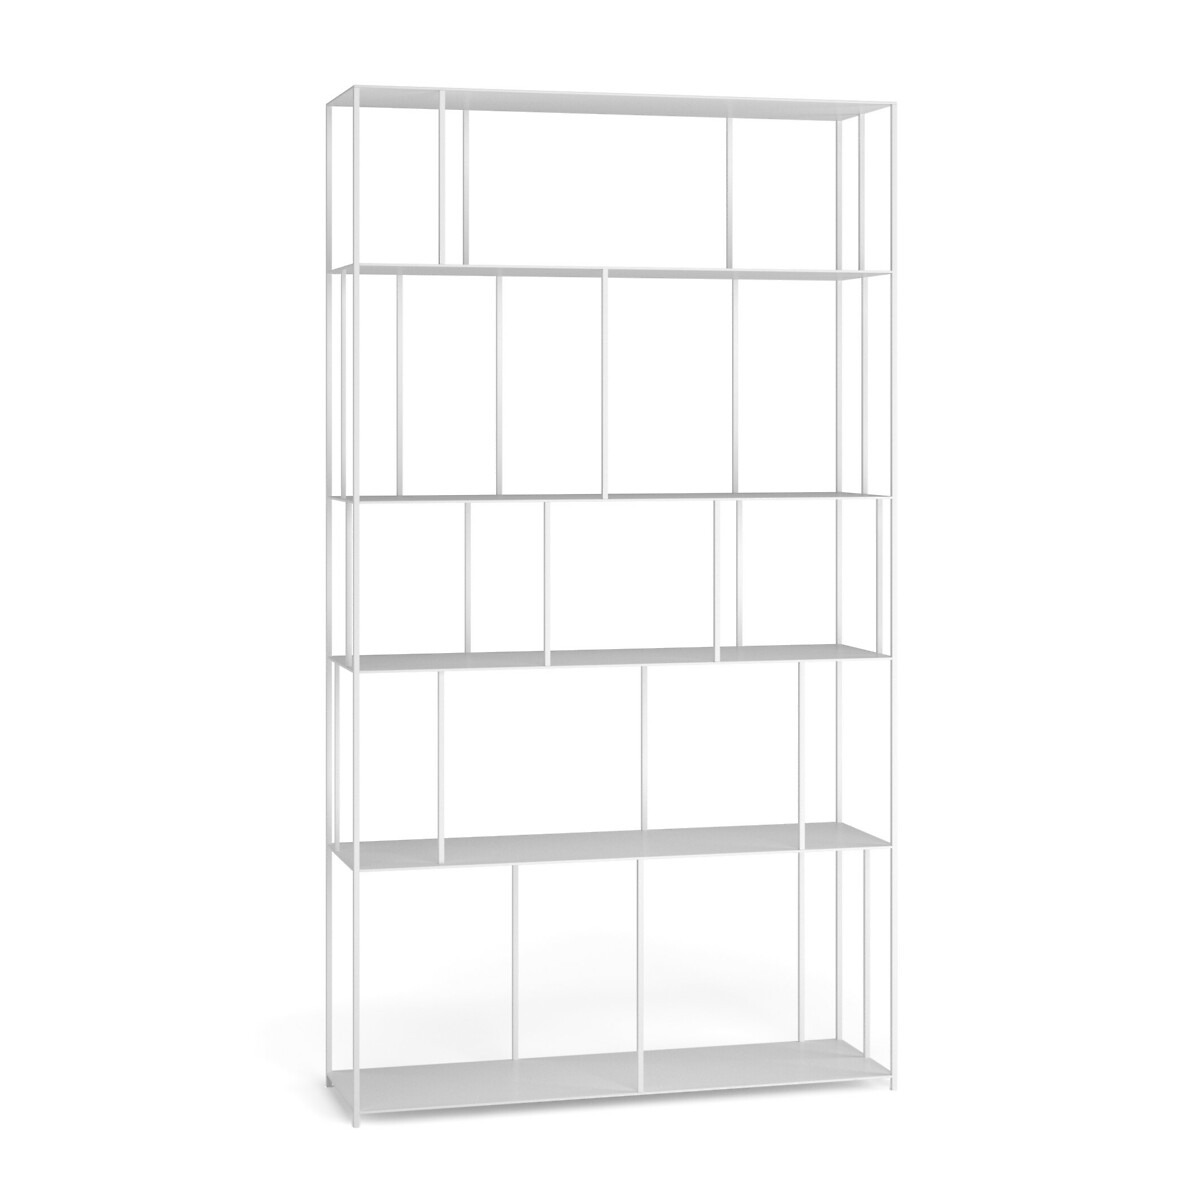 Parallel Wide Metal Bookcase - image 1